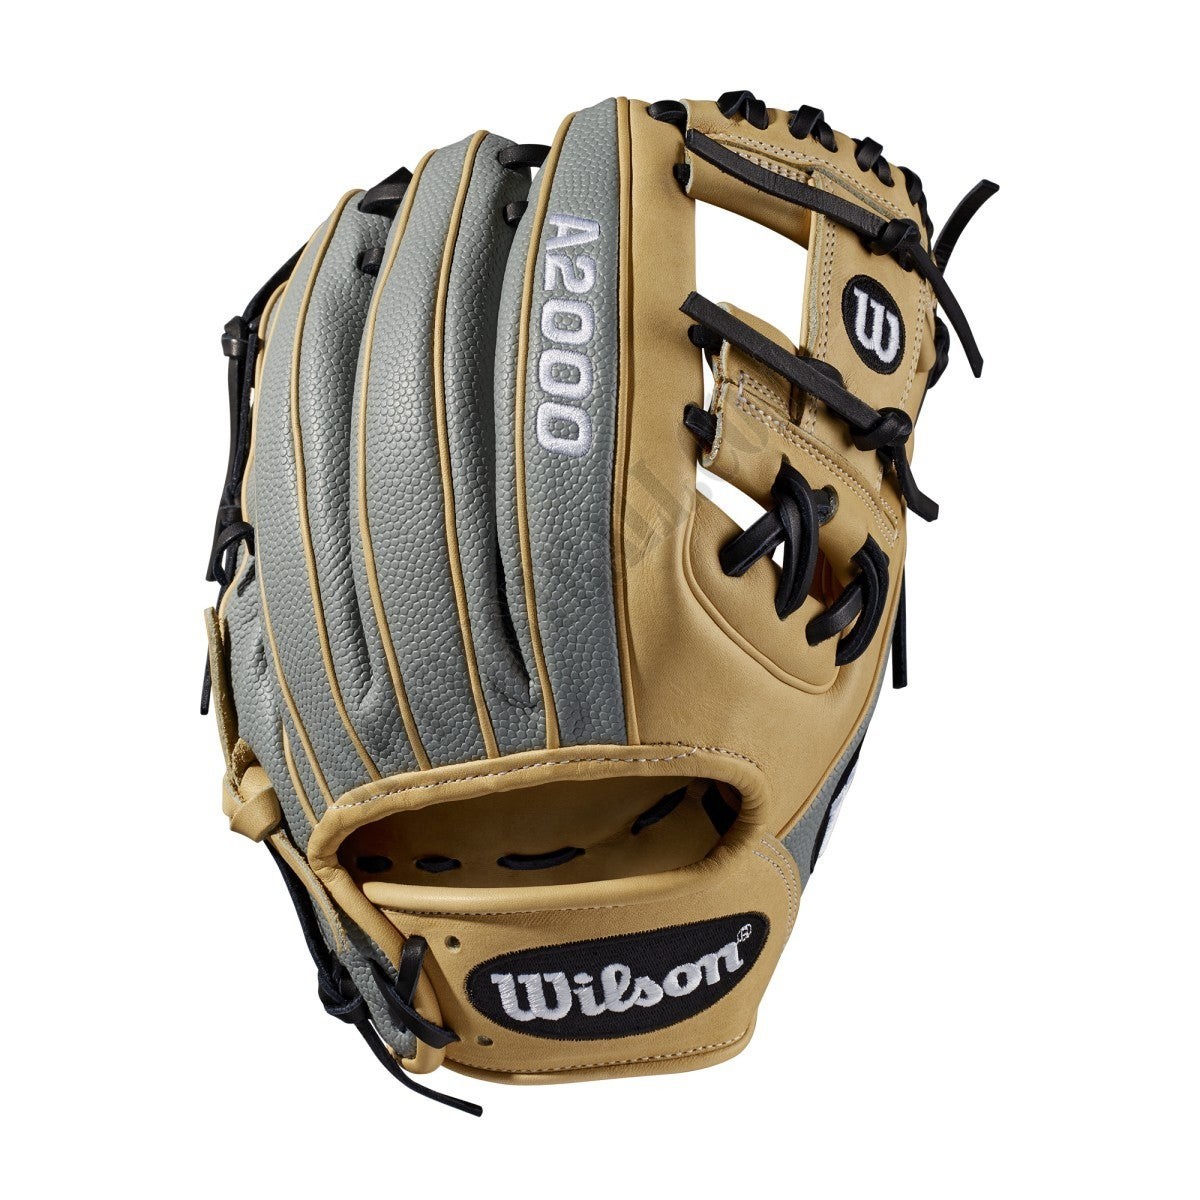 2019 A2000 1788 SuperSkin 11.25" Infield Baseball Glove - Right Hand Throw ● Wilson Promotions - -1